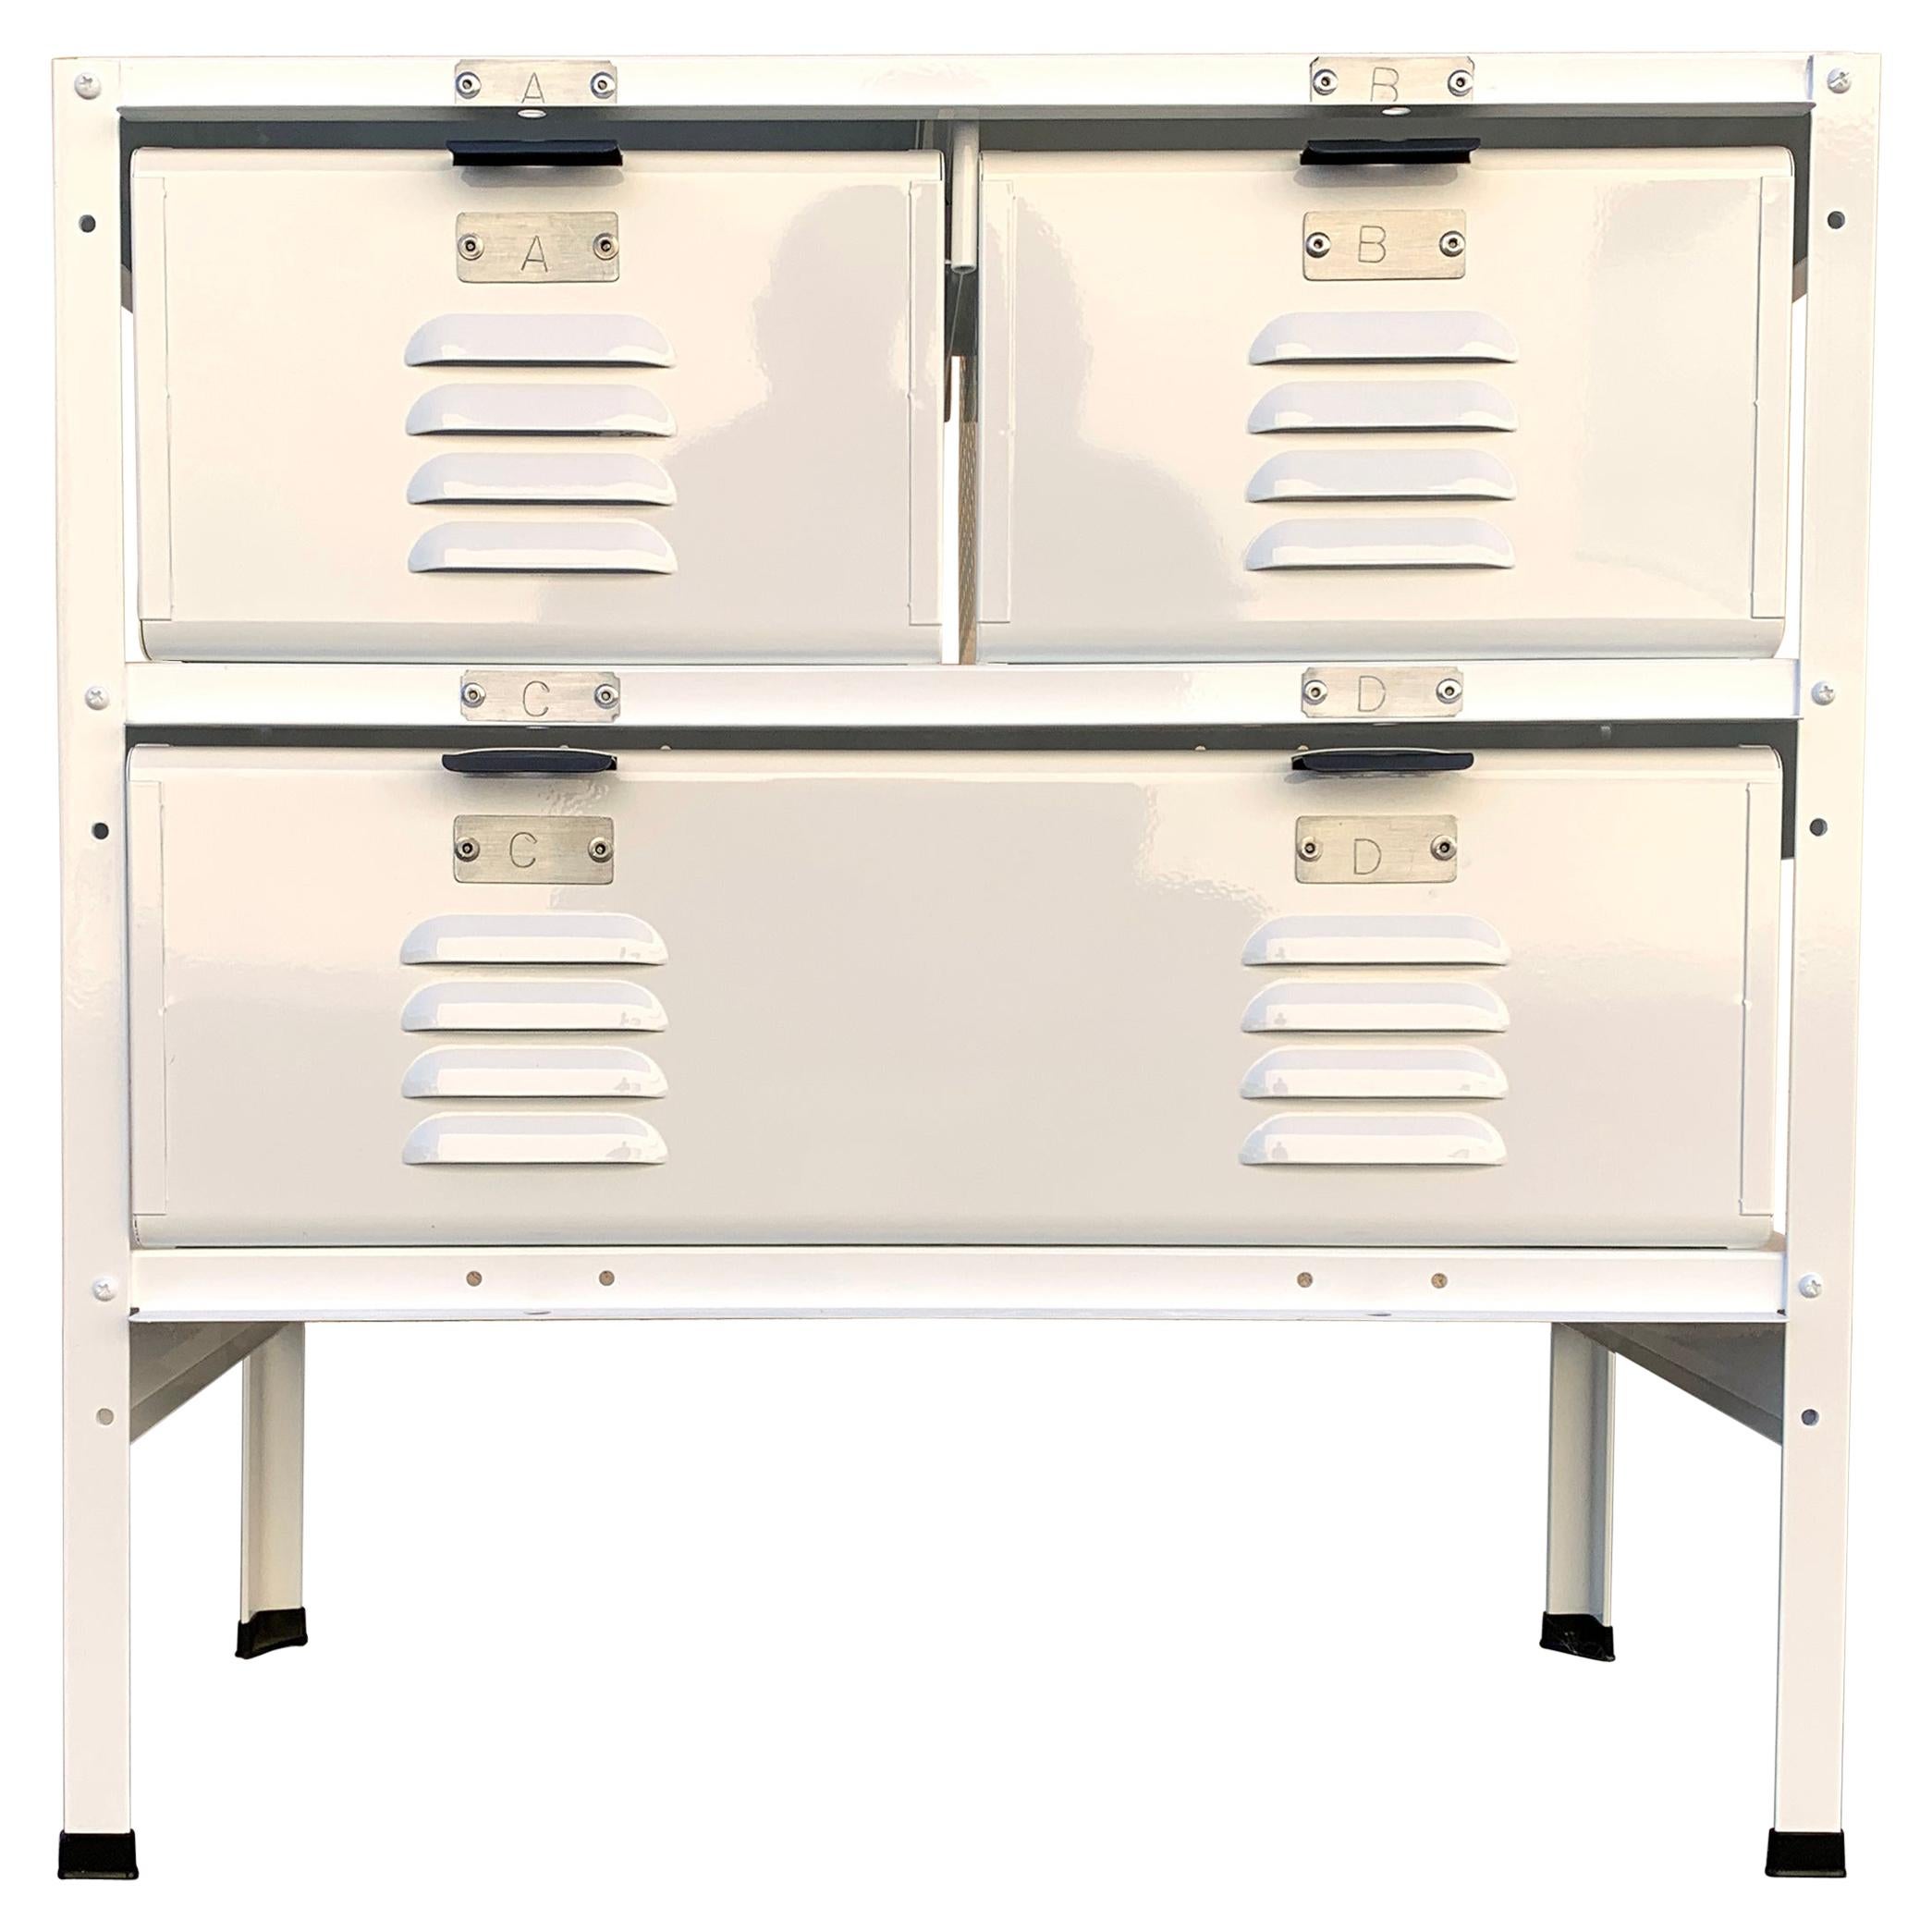 2 x 2 Locker Basket Unit in White on White, Newly Fabricated to Order For Sale